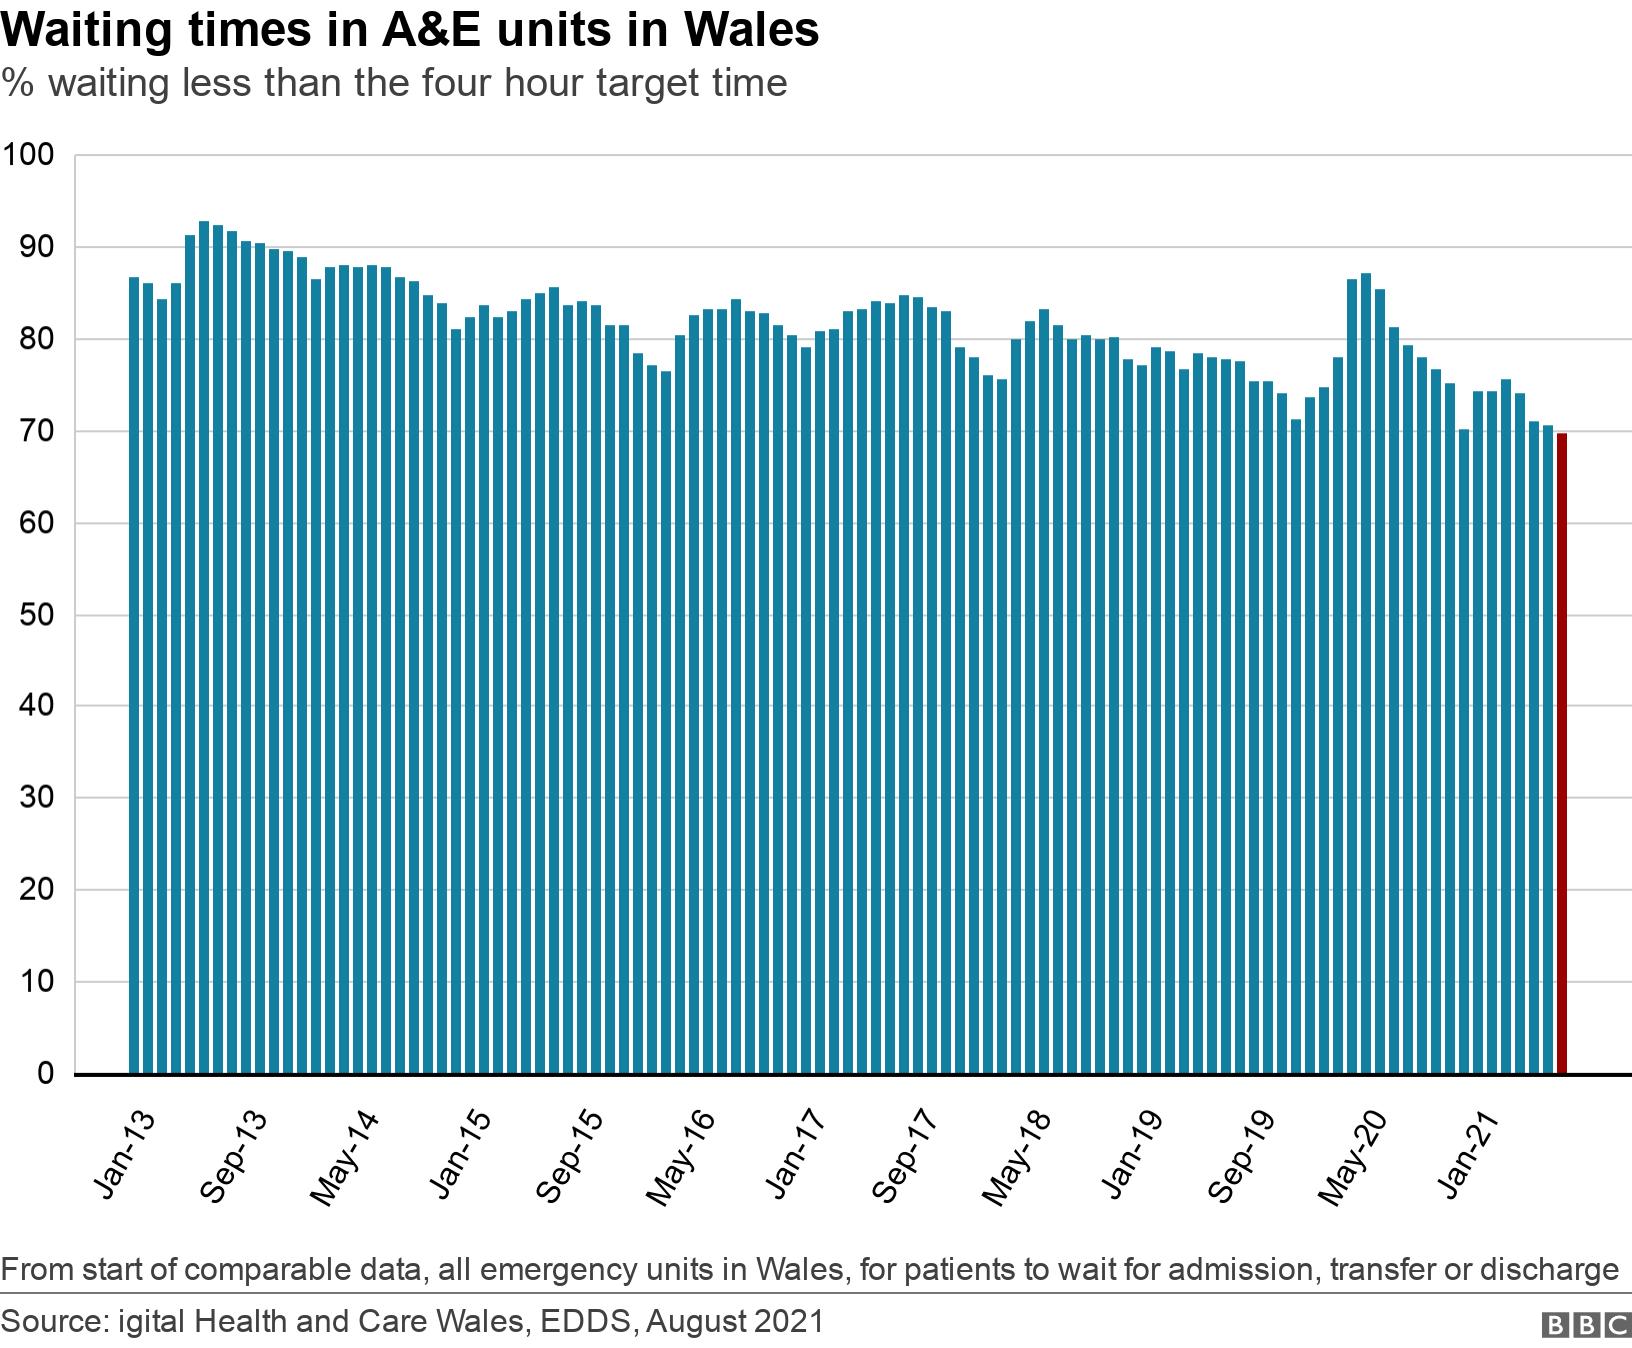 Waiting times in A&E units in Wales. % waiting less than the four hour target time.  From start of comparable data, all emergency units in Wales, for patients to wait for admission, transfer or discharge.